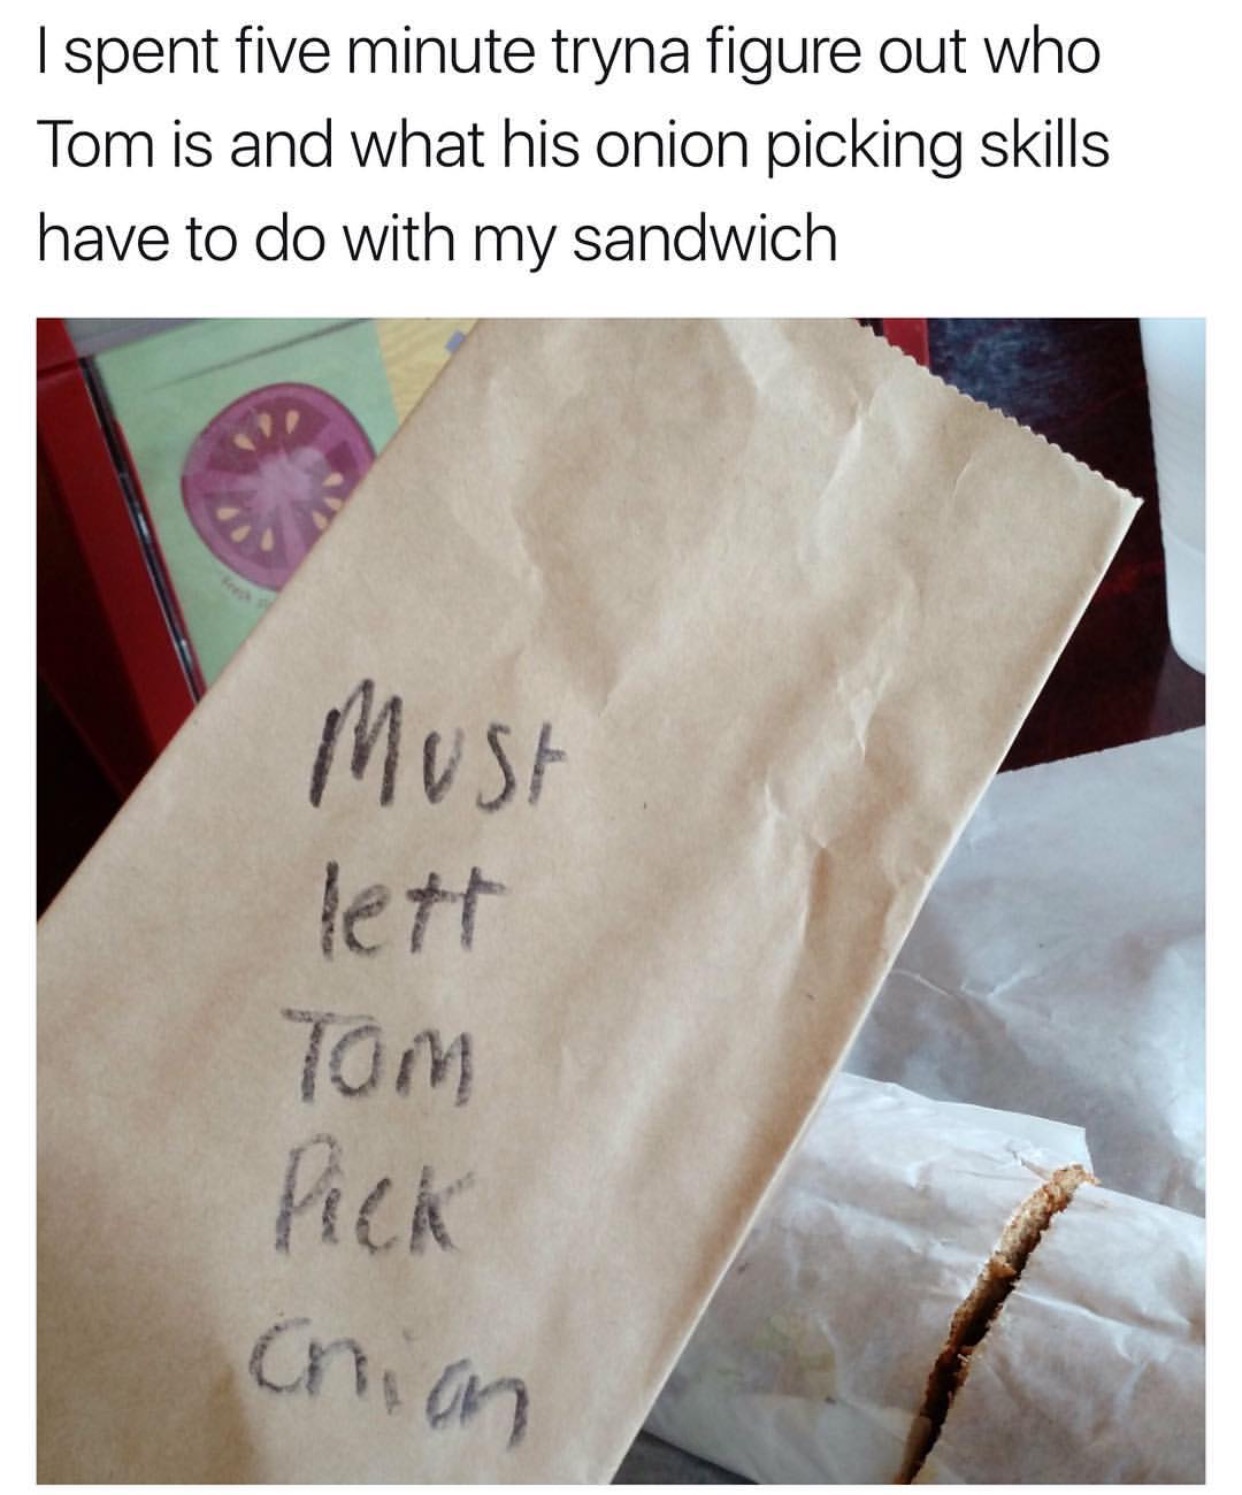 must lett tom pick onion meaning - I spent five minute tryna figure out who Tom is and what his onion picking skills have to do with my sandwich Must lett Tom Pick orion